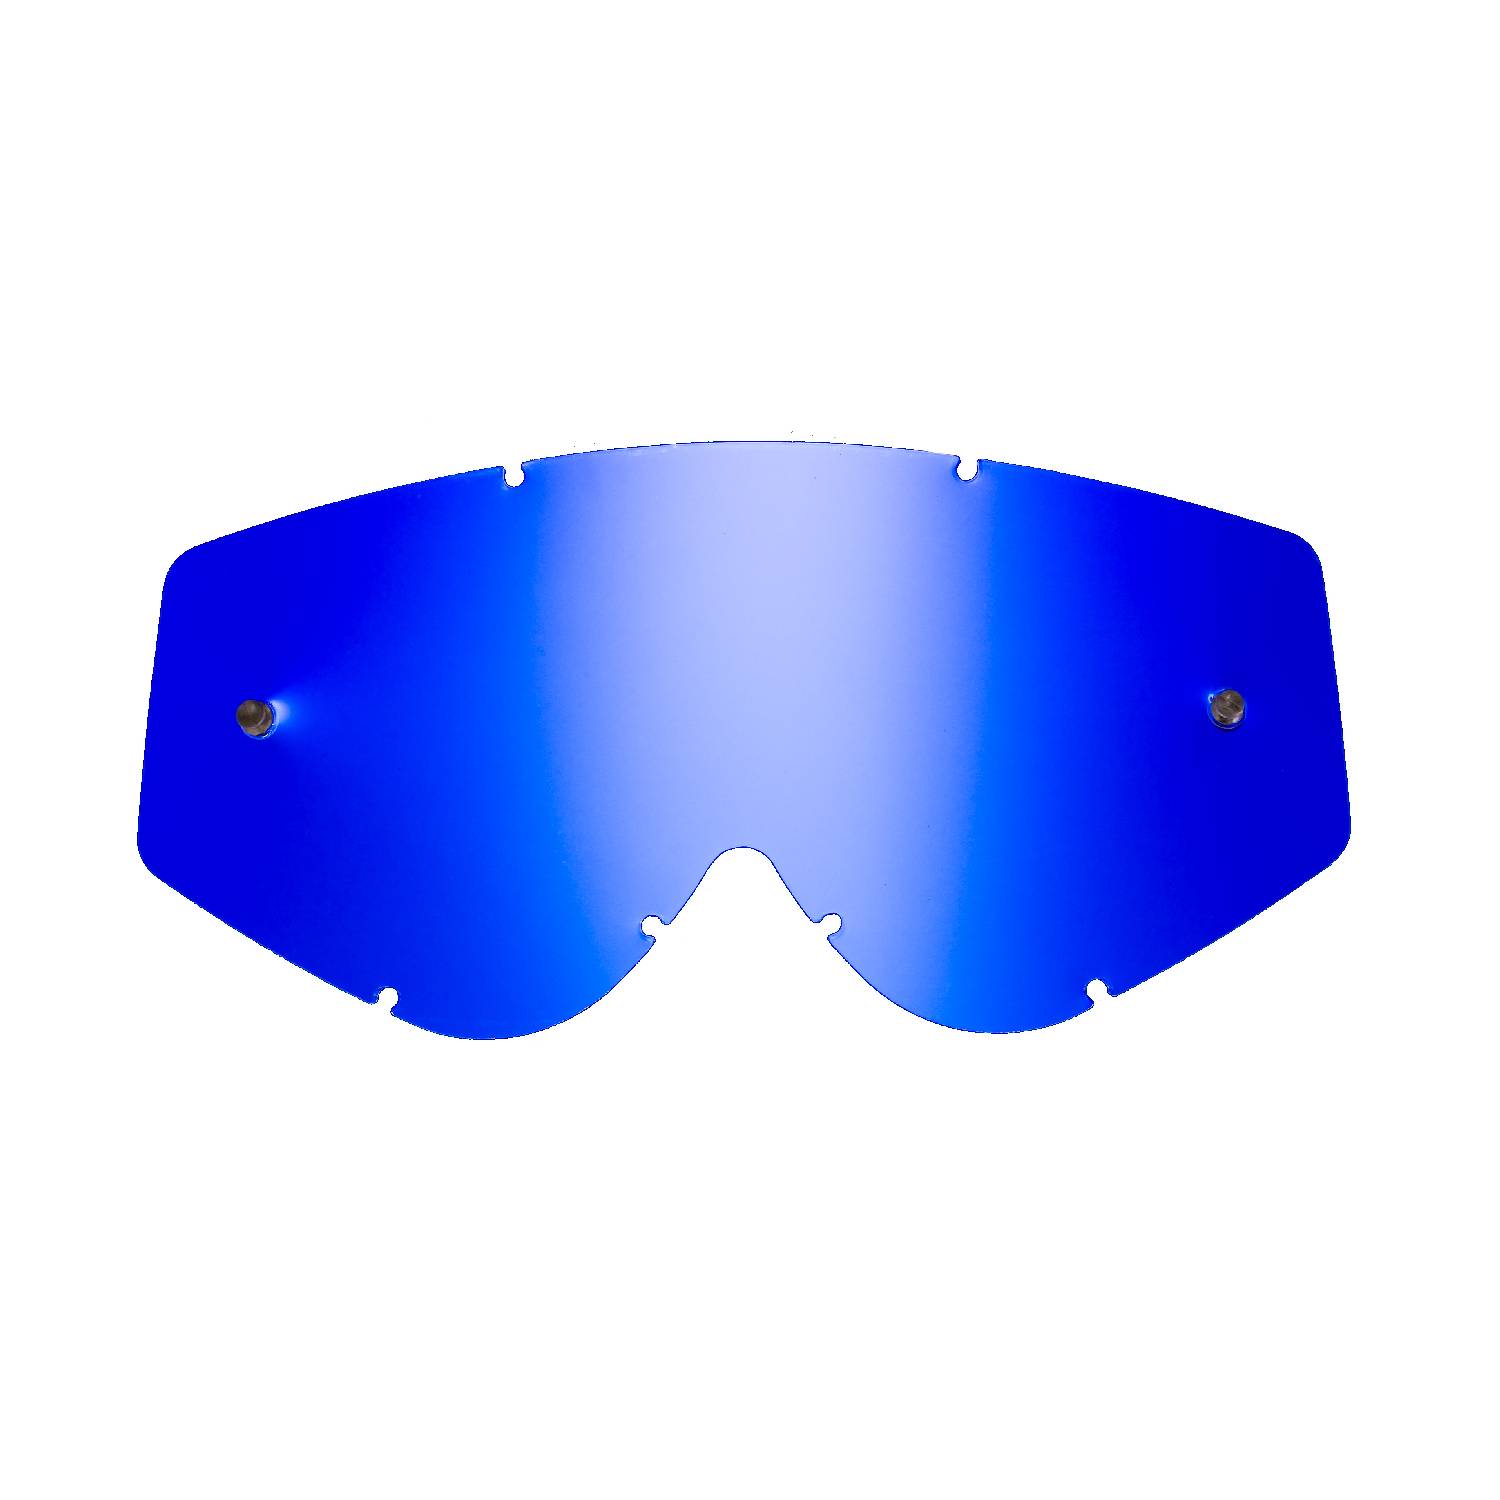 HZ GMZ  SE-411133-HZ blue mirror replacement lenses for goggles